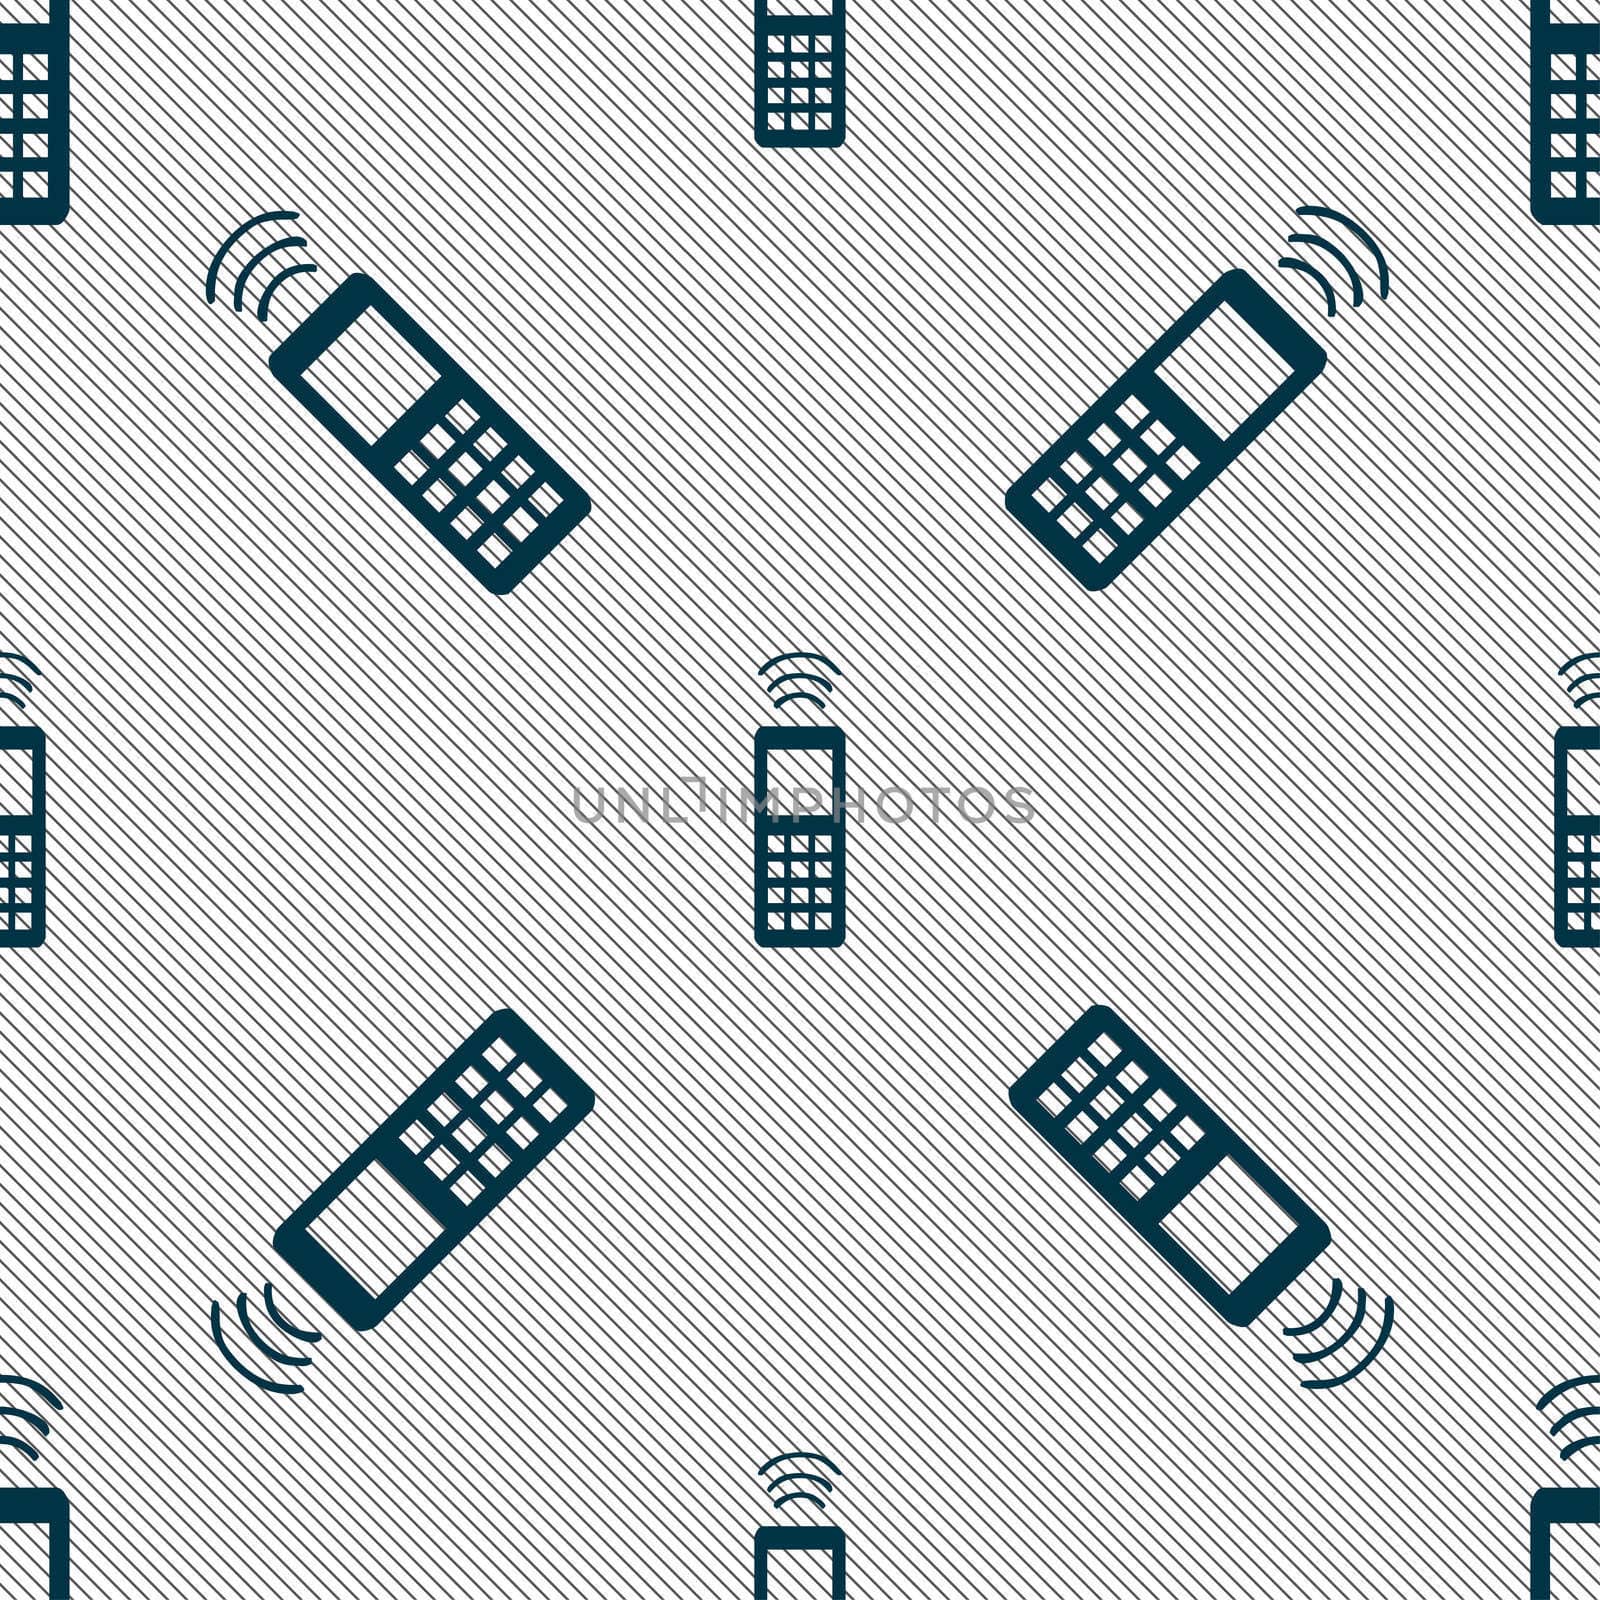 the remote control icon sign. Seamless pattern with geometric texture.  by serhii_lohvyniuk